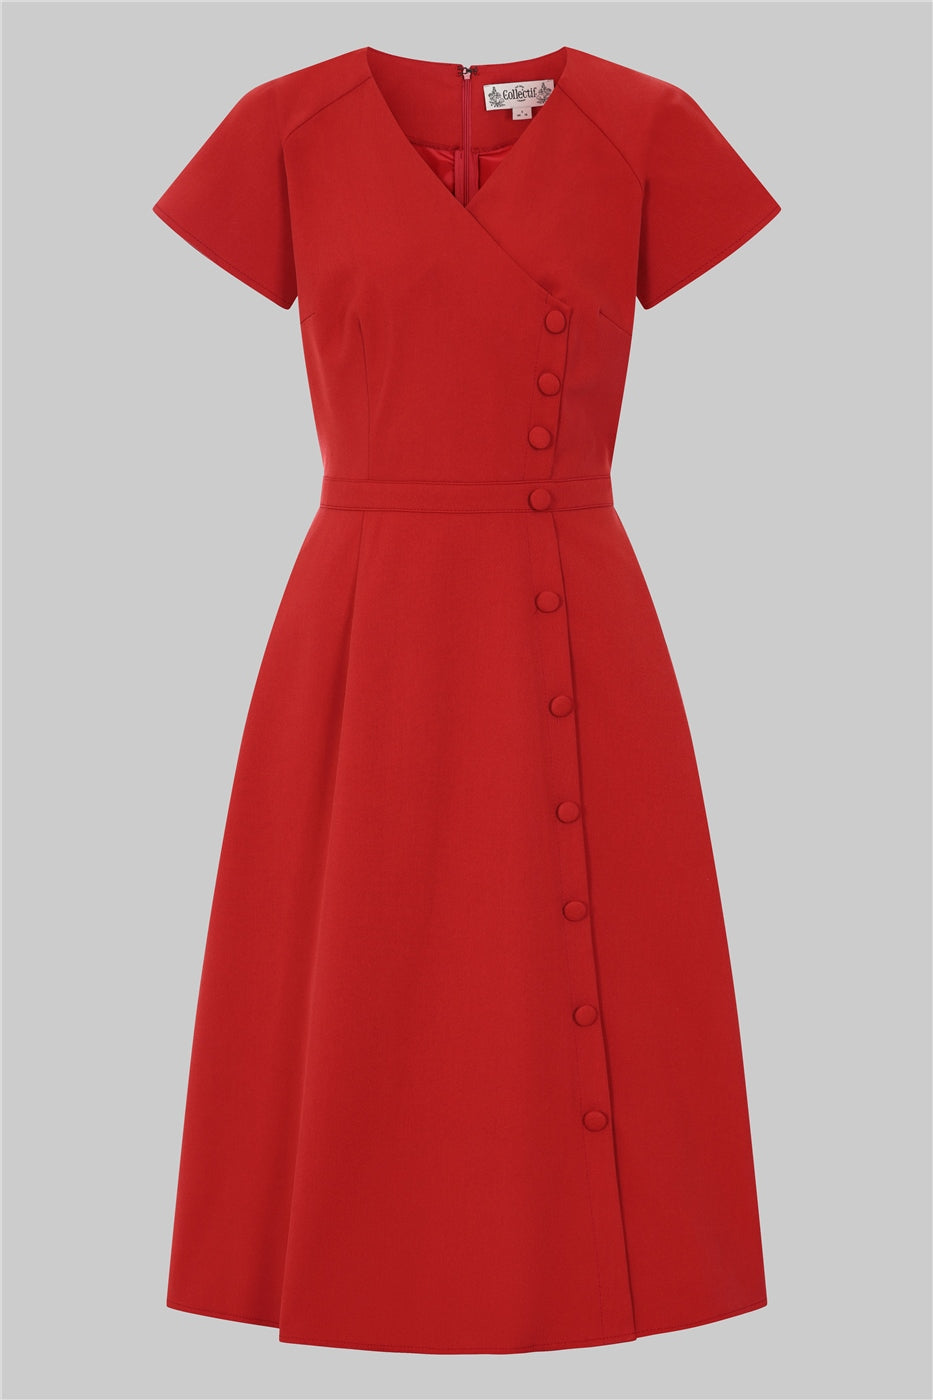 Red short sleeve fit and flare 50s dress with buttons down the right side